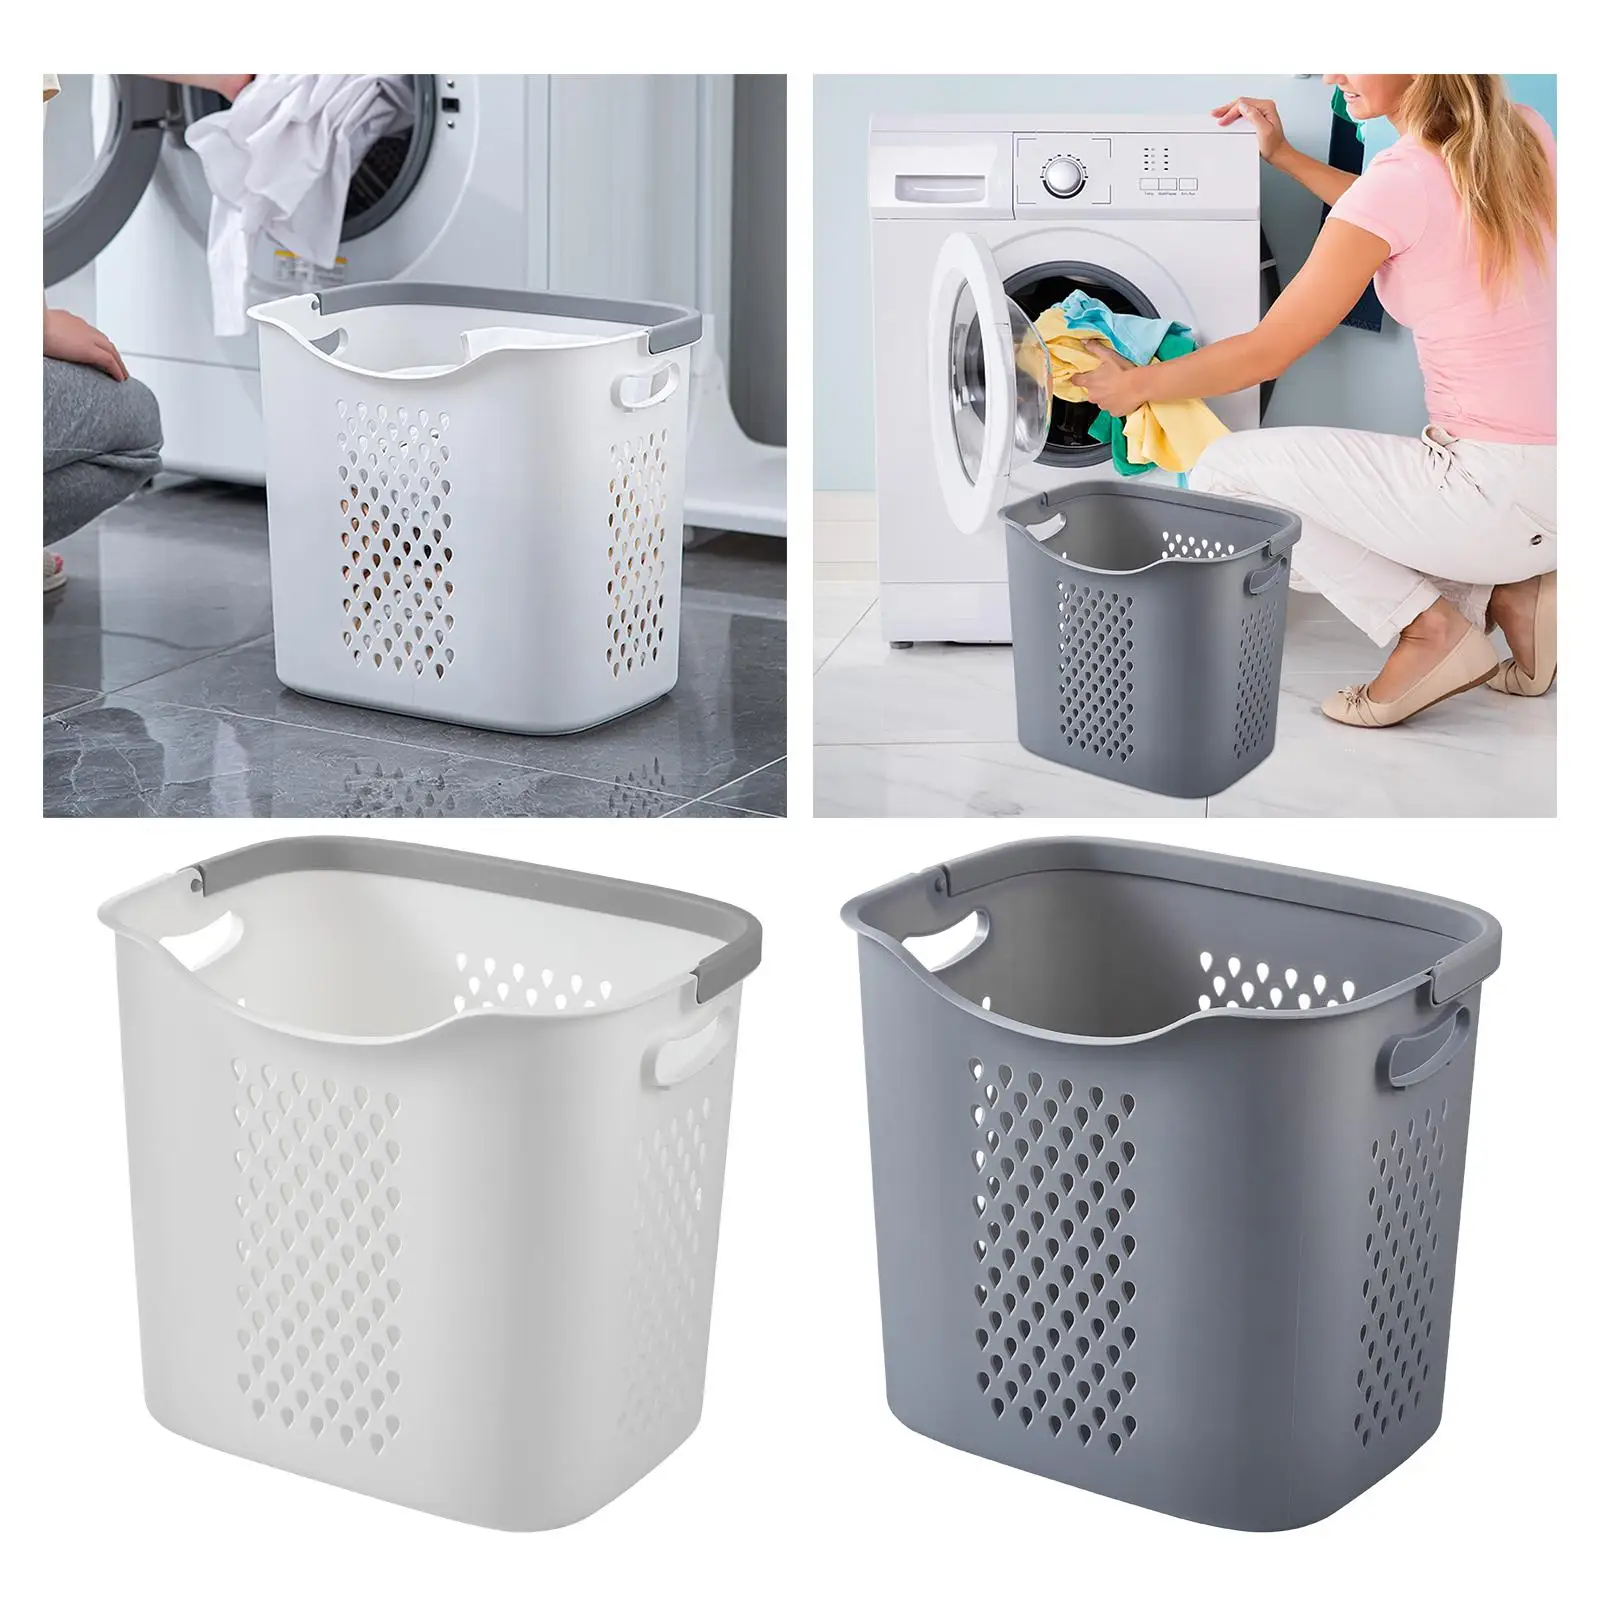 Laundry Basket Toy Storage Bins Organizer Clothing Storage Bucket Dirty Clothes Basket for Living Room Bedroom Home Shoes Toys